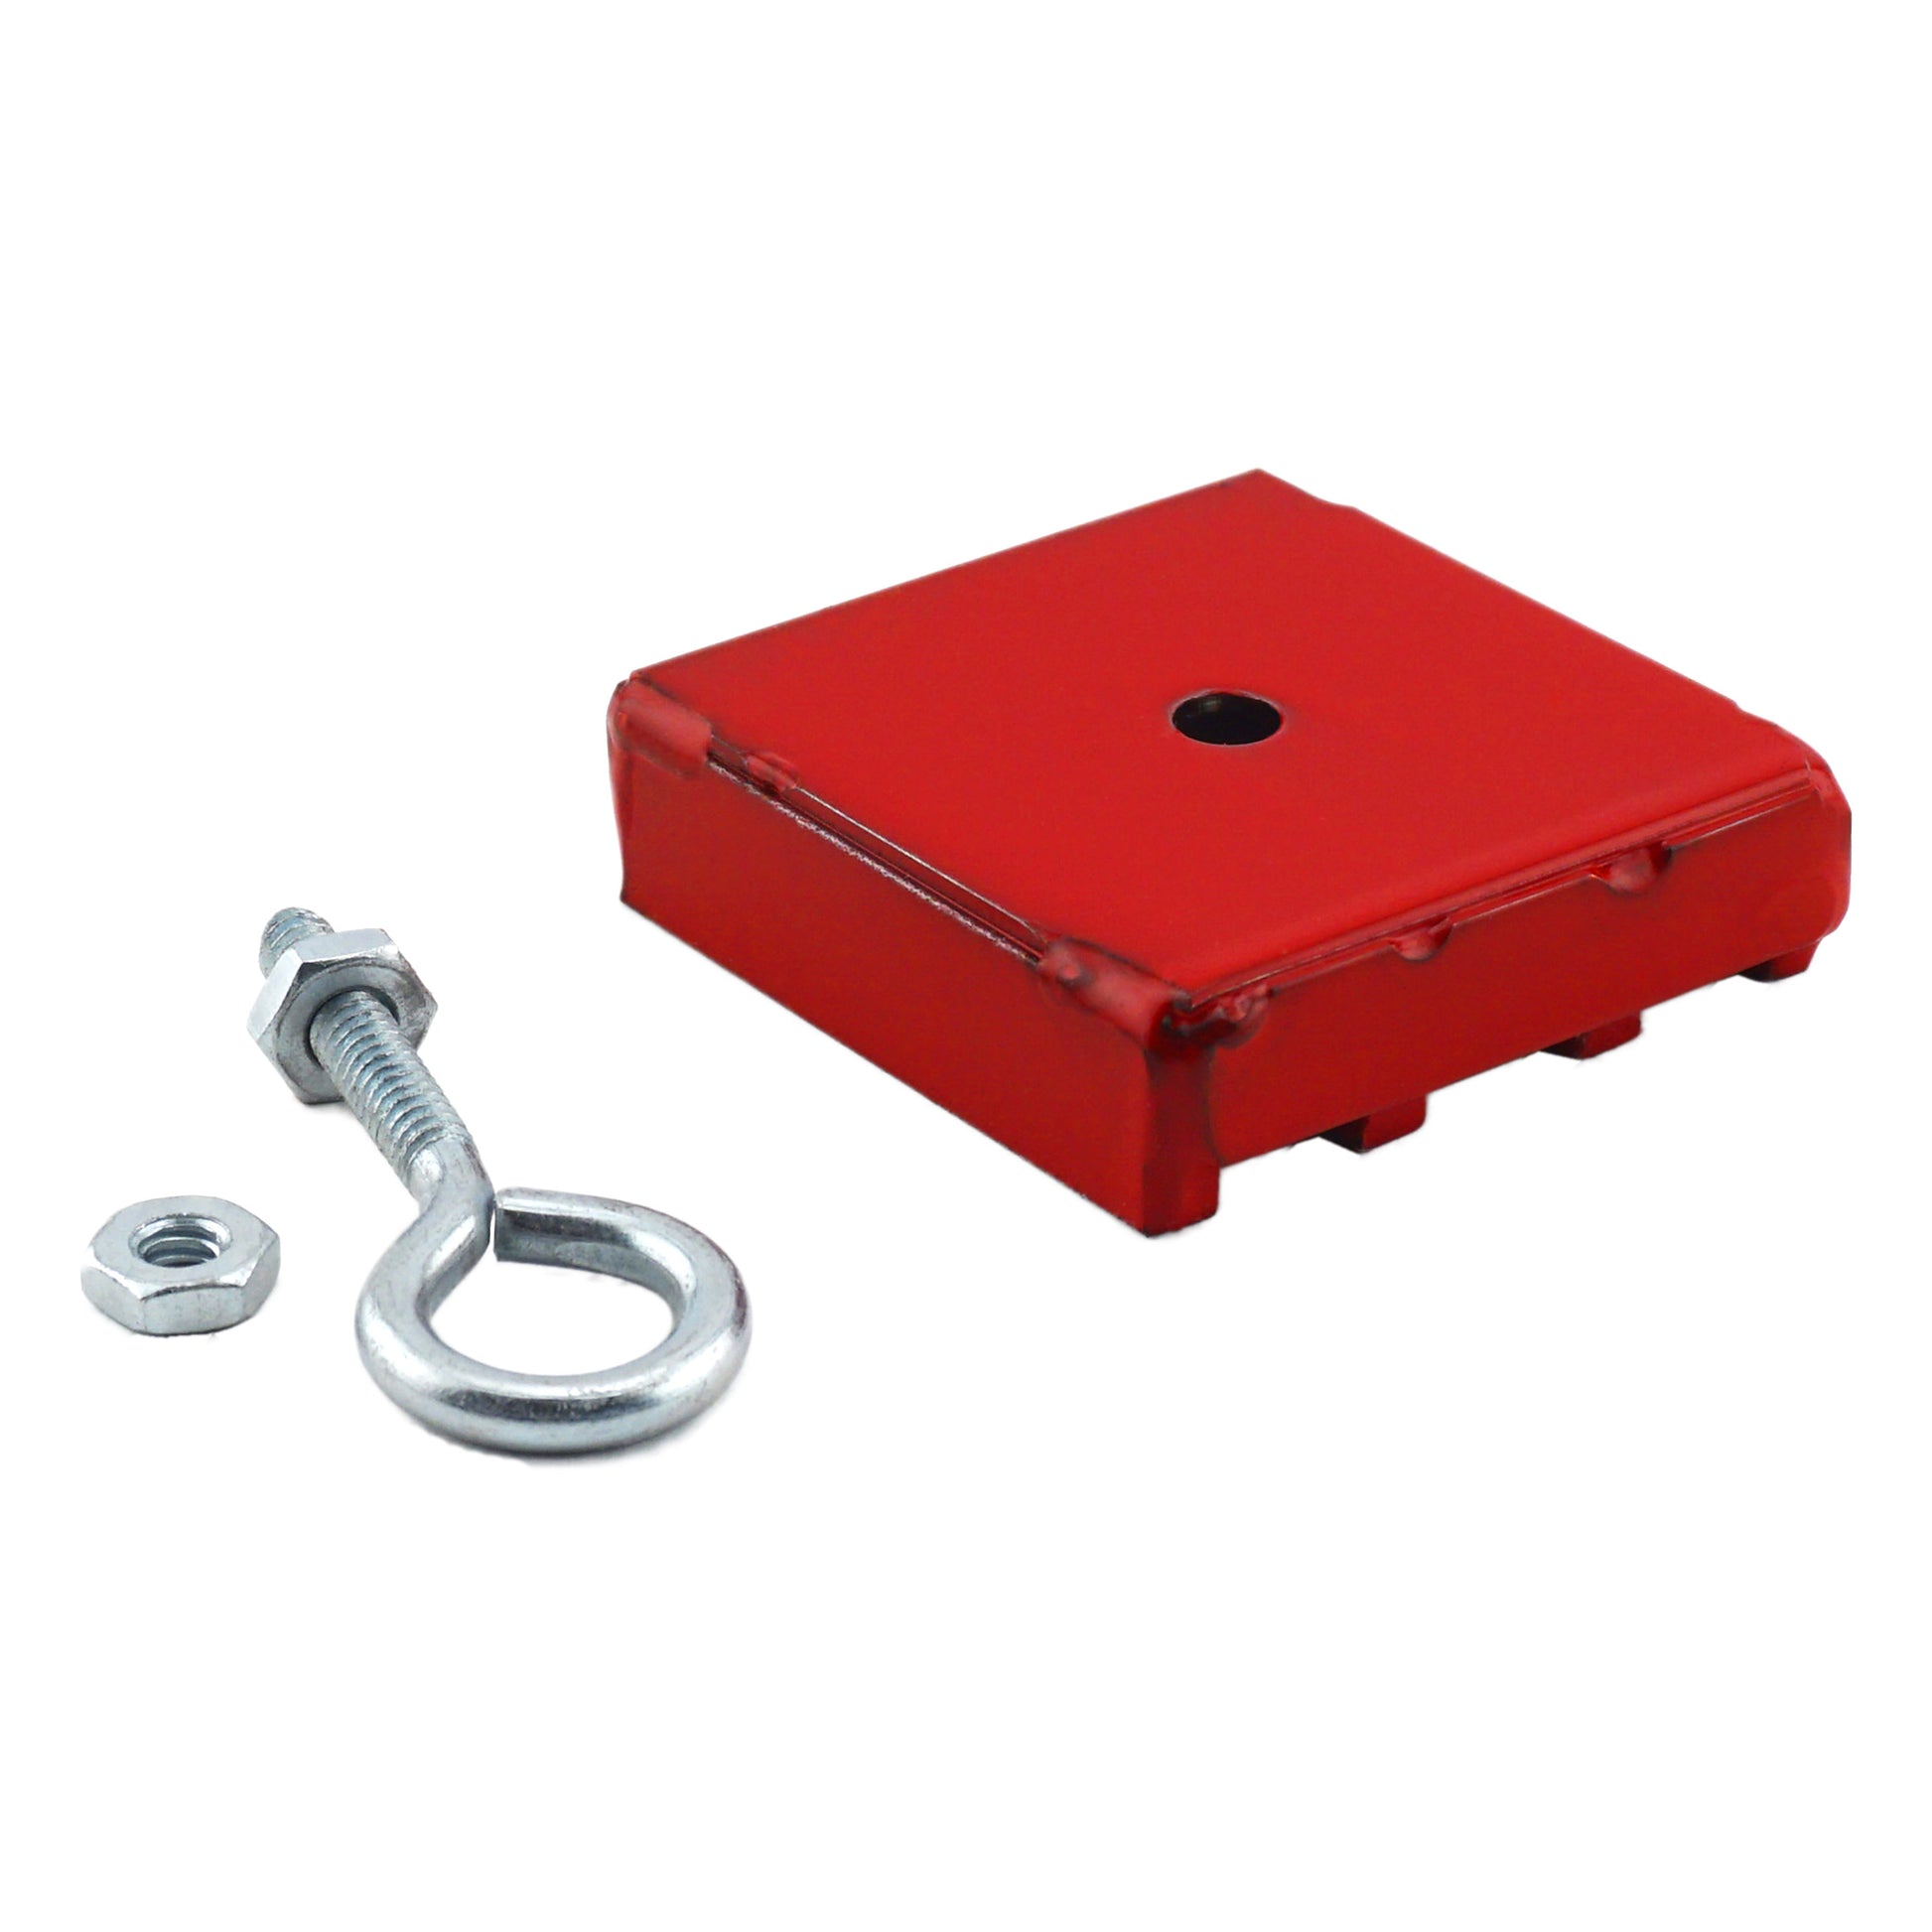 Load image into Gallery viewer, 37010B Heavy-Duty Holding and Retrieving Magnet - 45 Degree Angle View